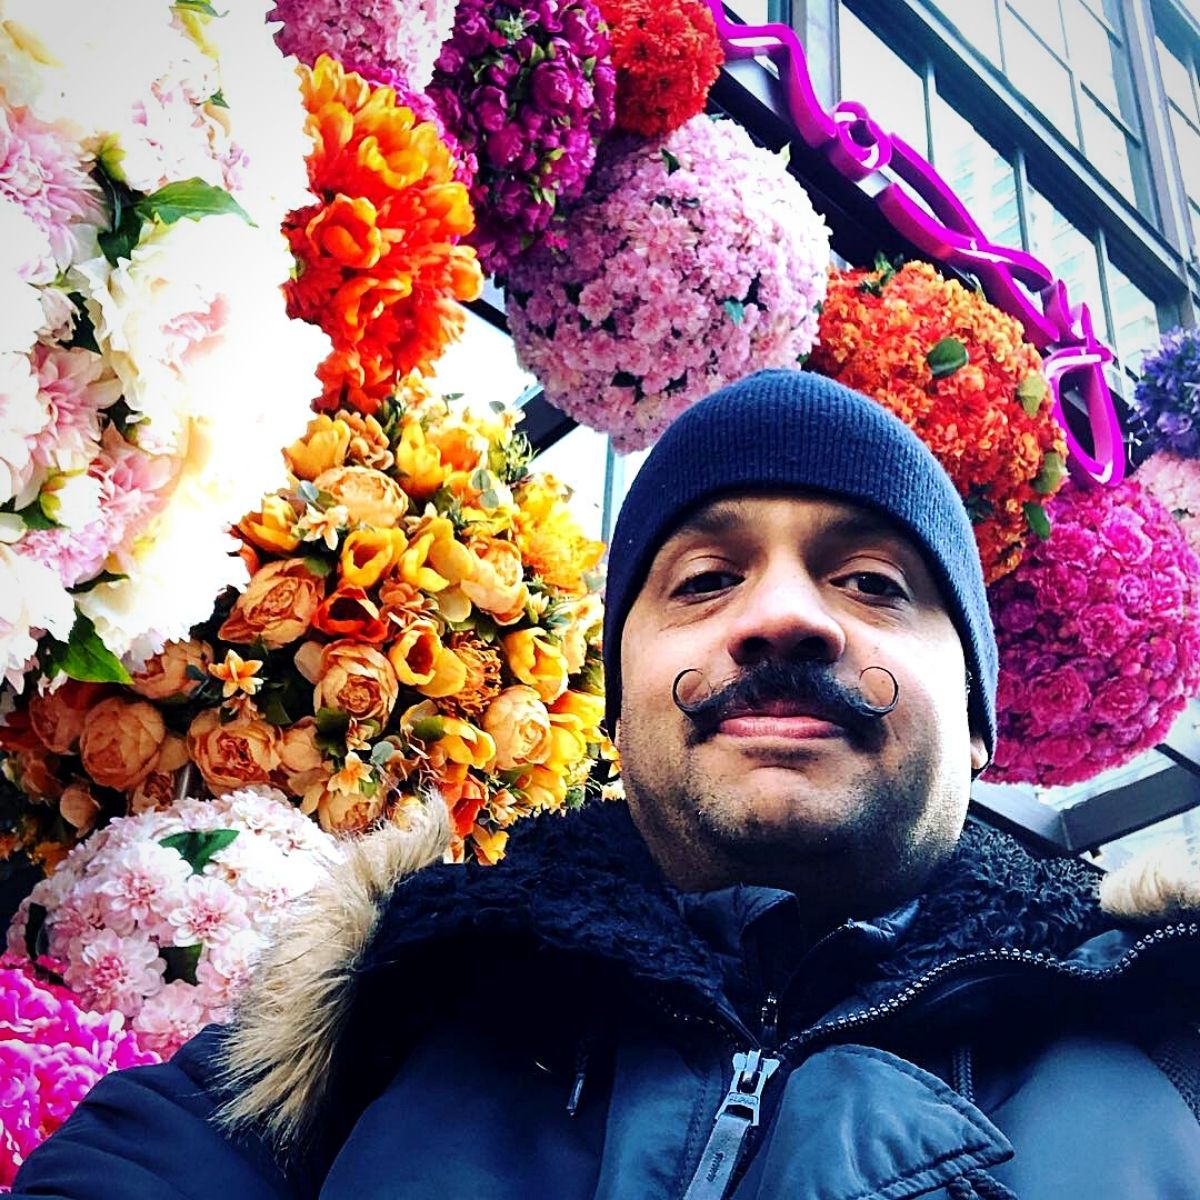 James François-Pijuan’s Wants to Revive the NYC Historic Floral District